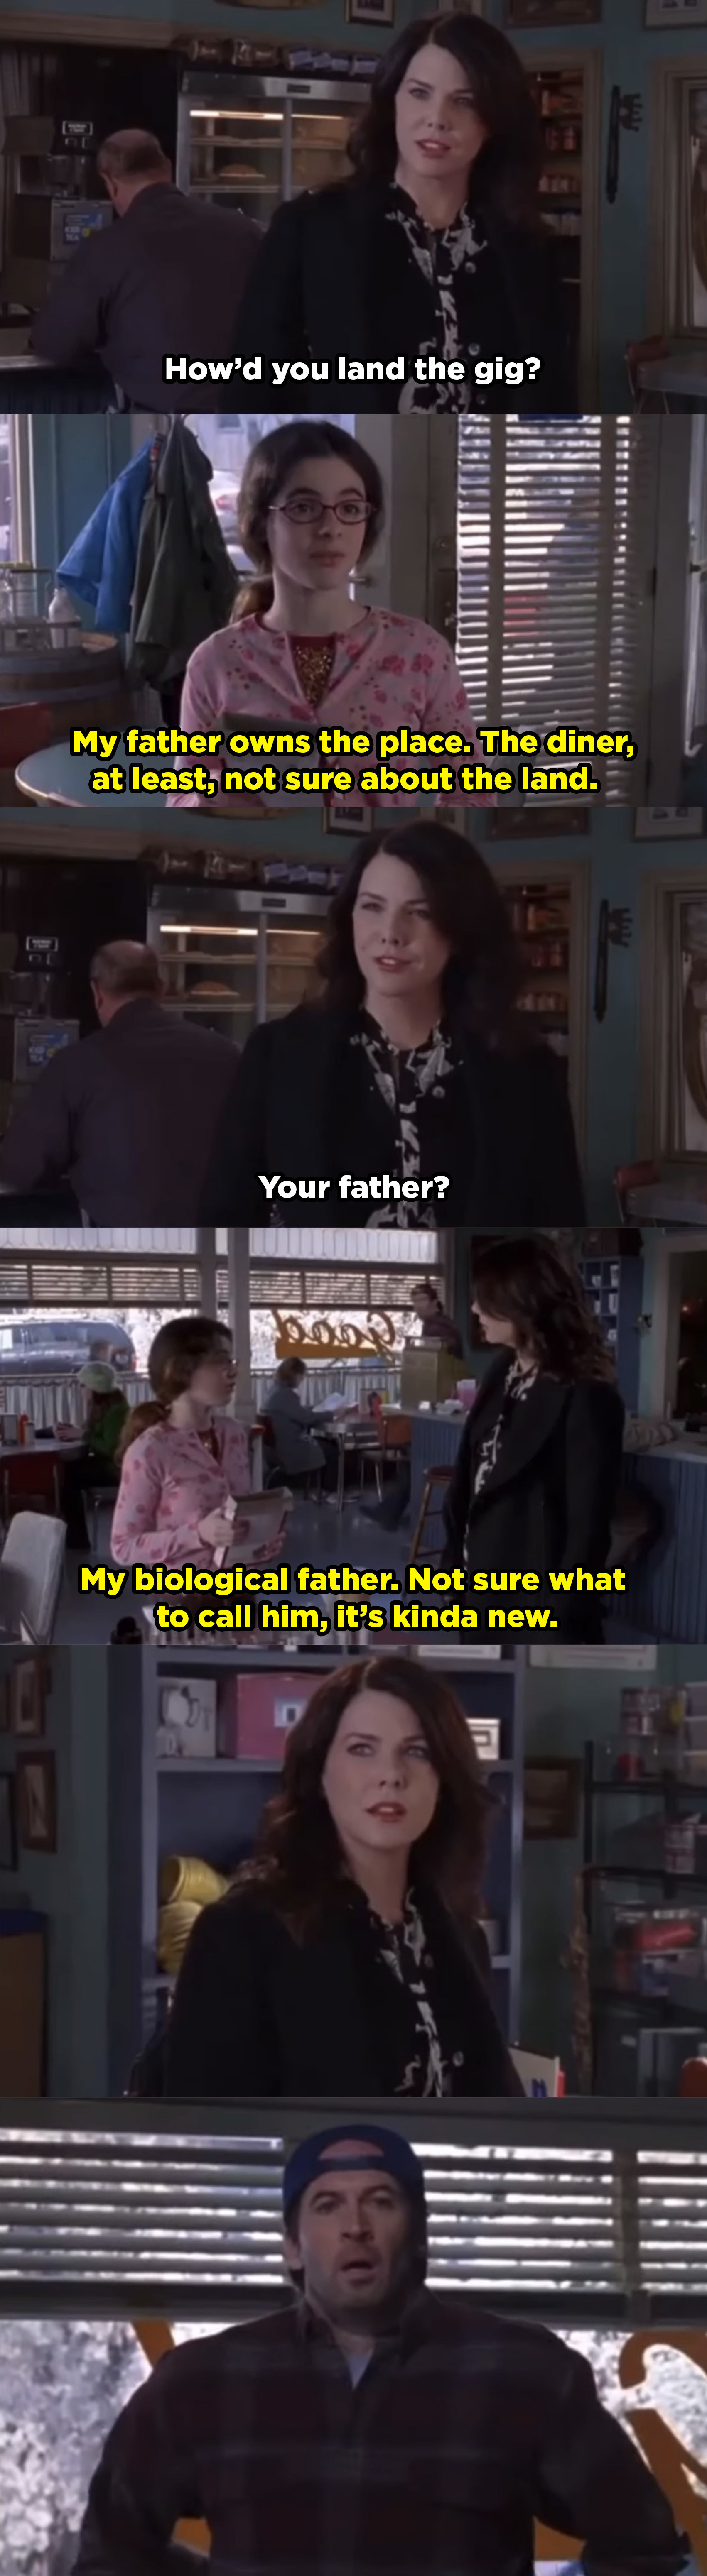 Screen shots from &quot;Gilmore Girls&quot;